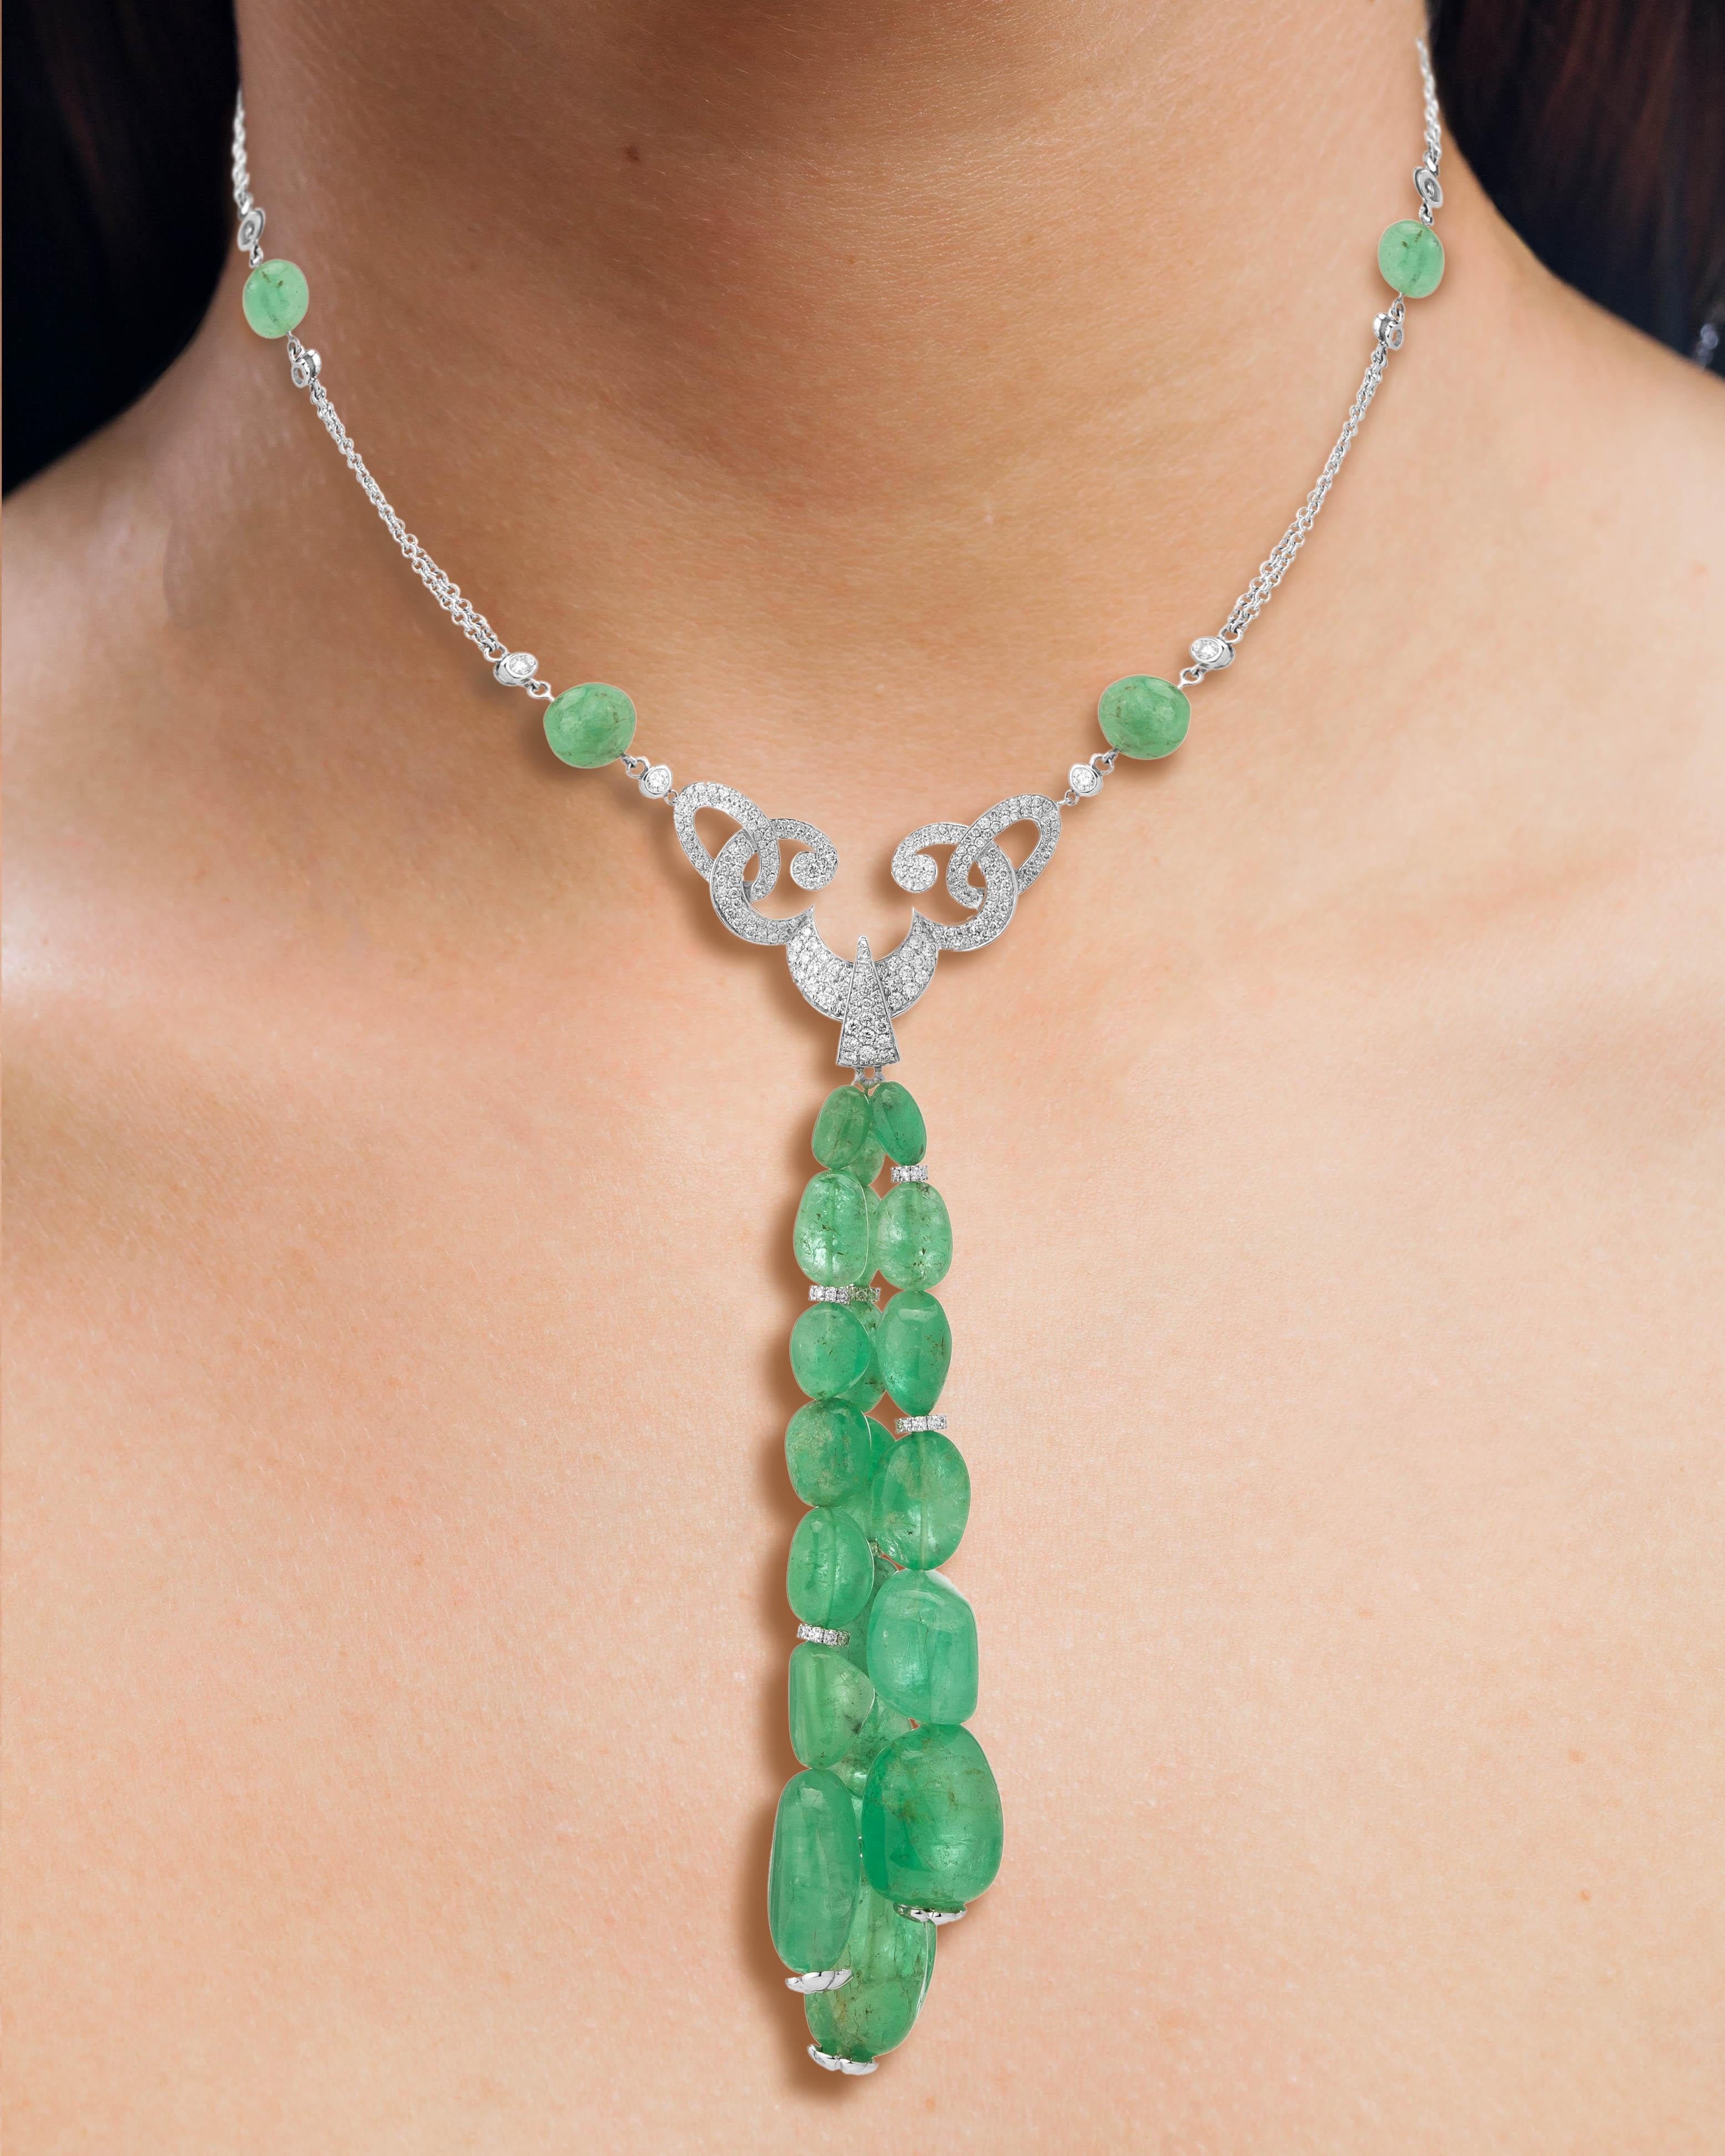 18 Karat white gold renaissance styled necklace featuring Muzo colombian emerald tassles weighing 131.35 carats and 2.09 carats of round brilliant diamonds

Muzo Emerald Colombia Heritage Verity Pendant set with 131.35 carats Emerald

Verity is a